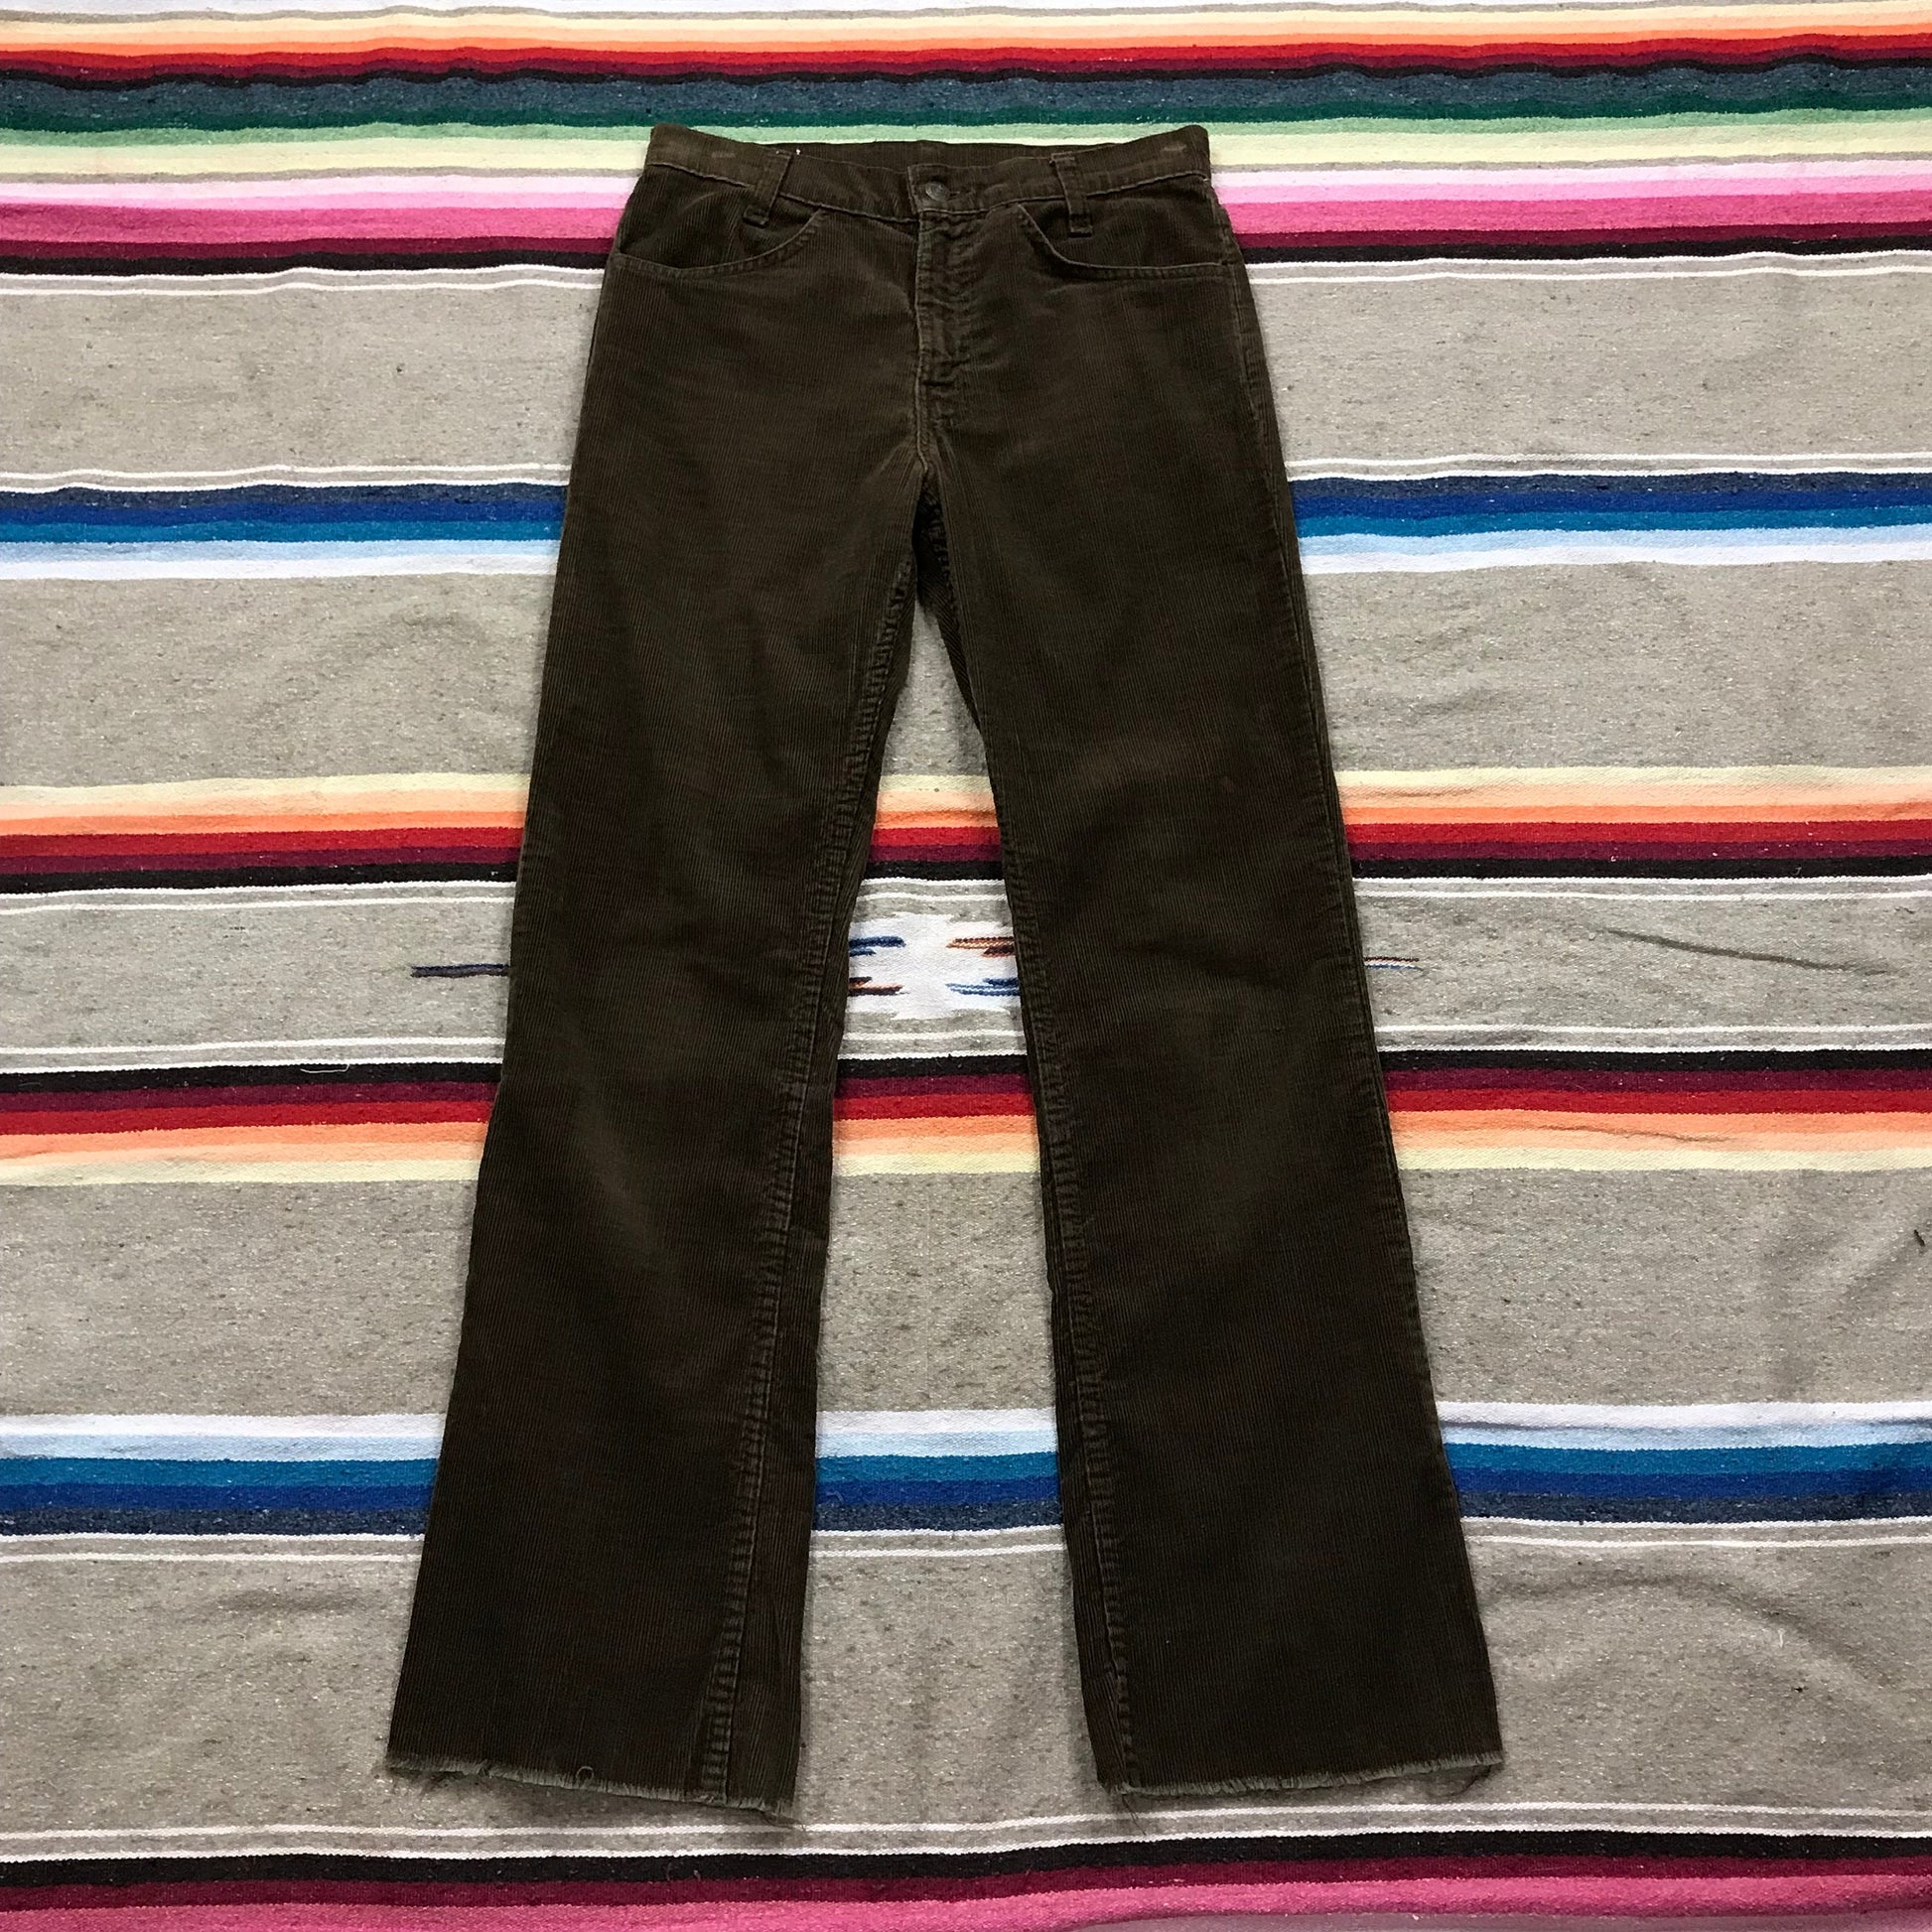 1970s Levi's 746 Corduroy Flare Pants Made in USA Size 29x29.5